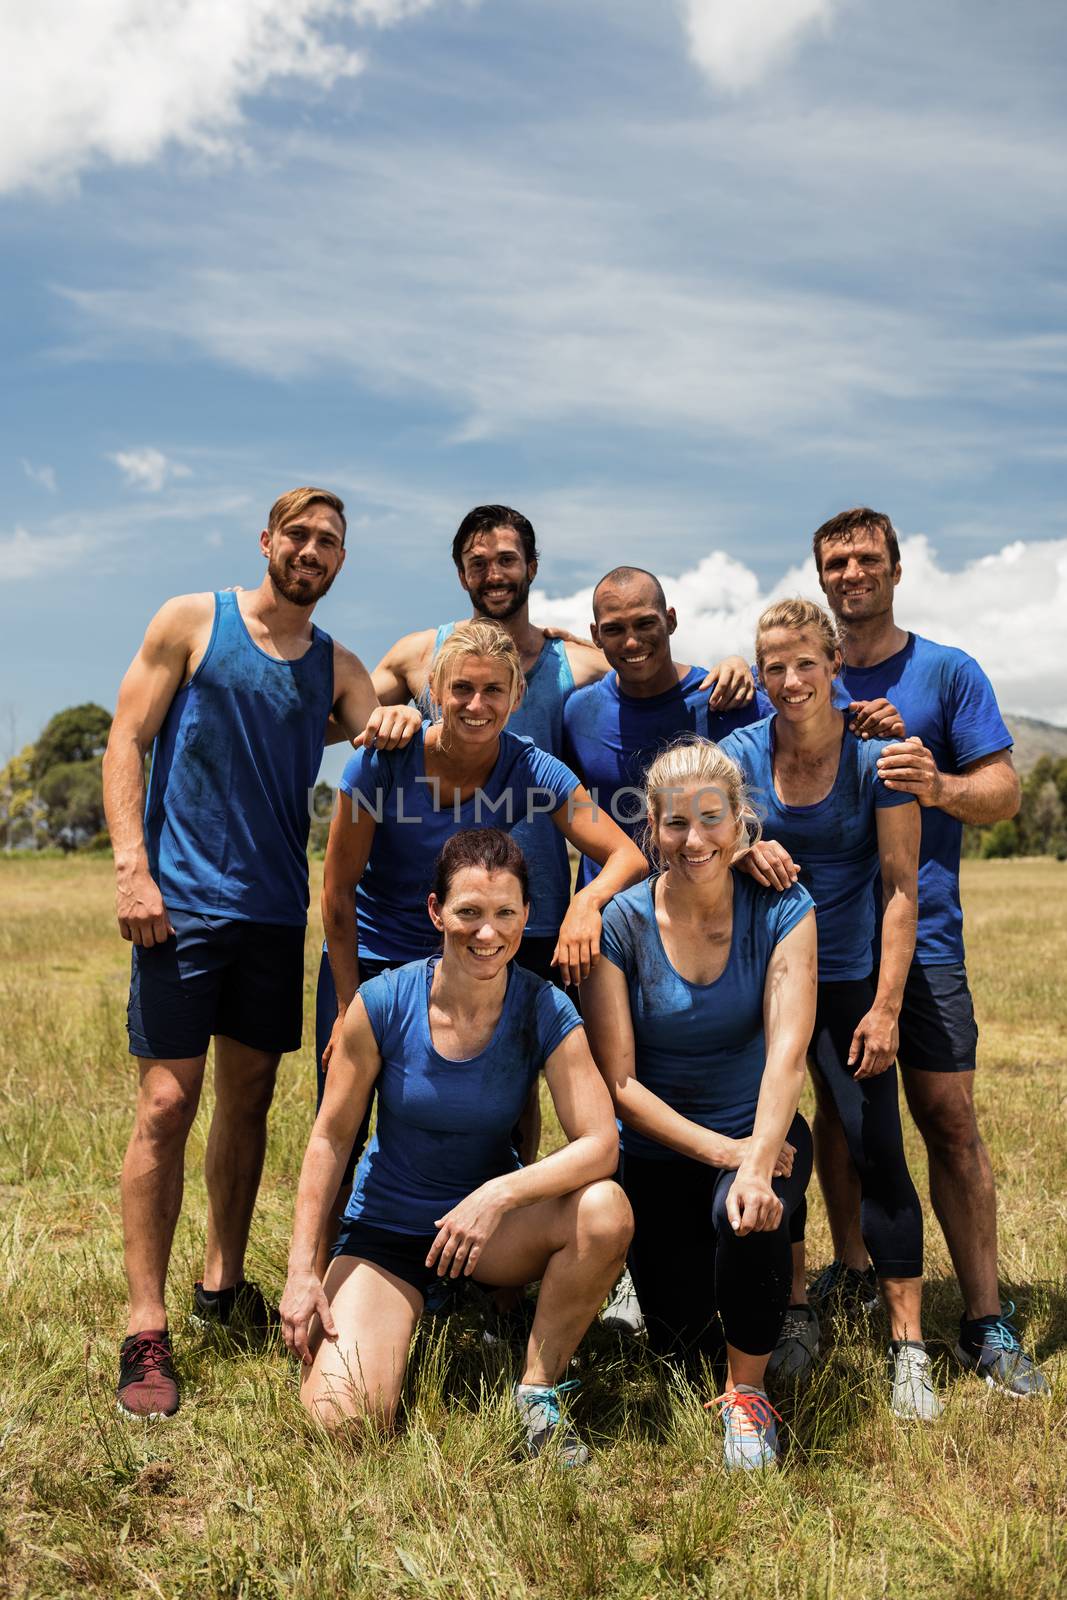 Group of fit people posing together in boot camp by Wavebreakmedia